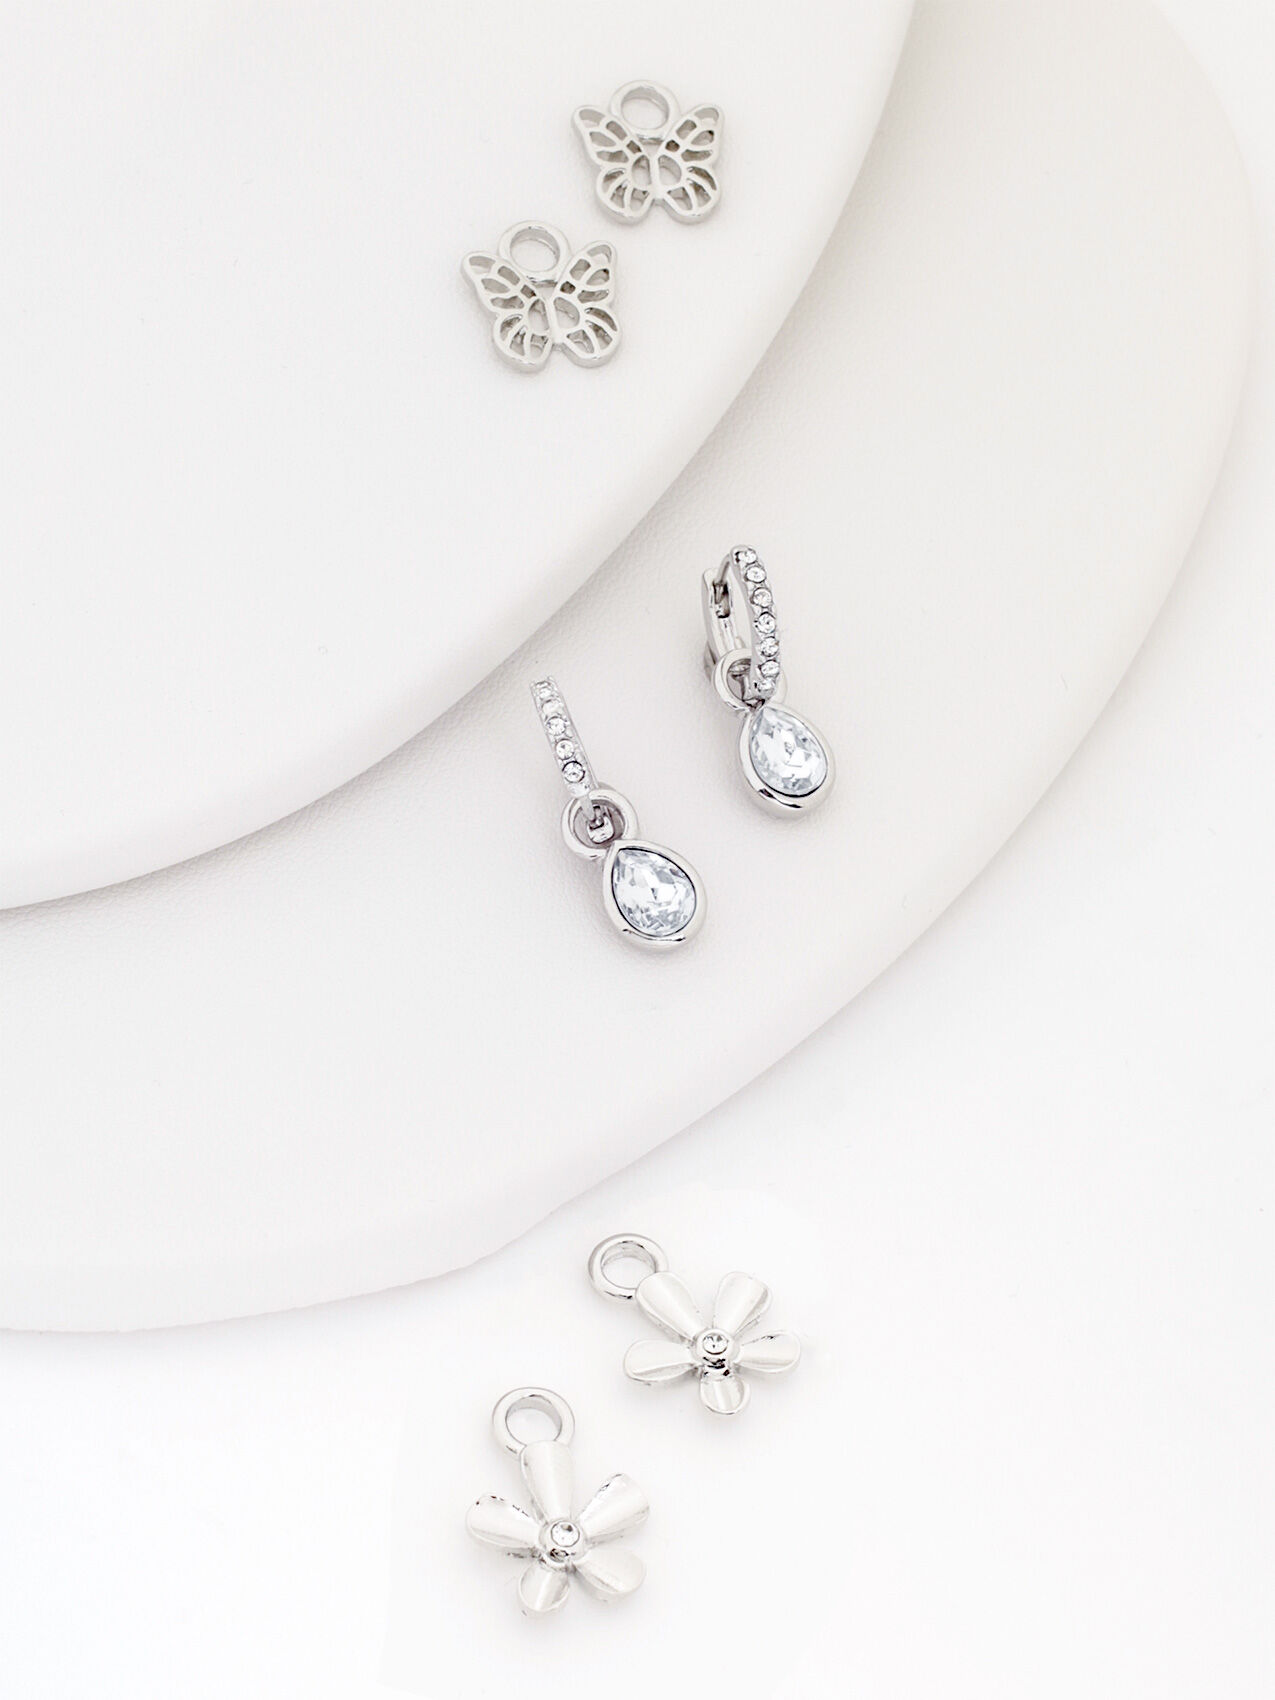 Small Silver Hoops with Interchangeable Charms